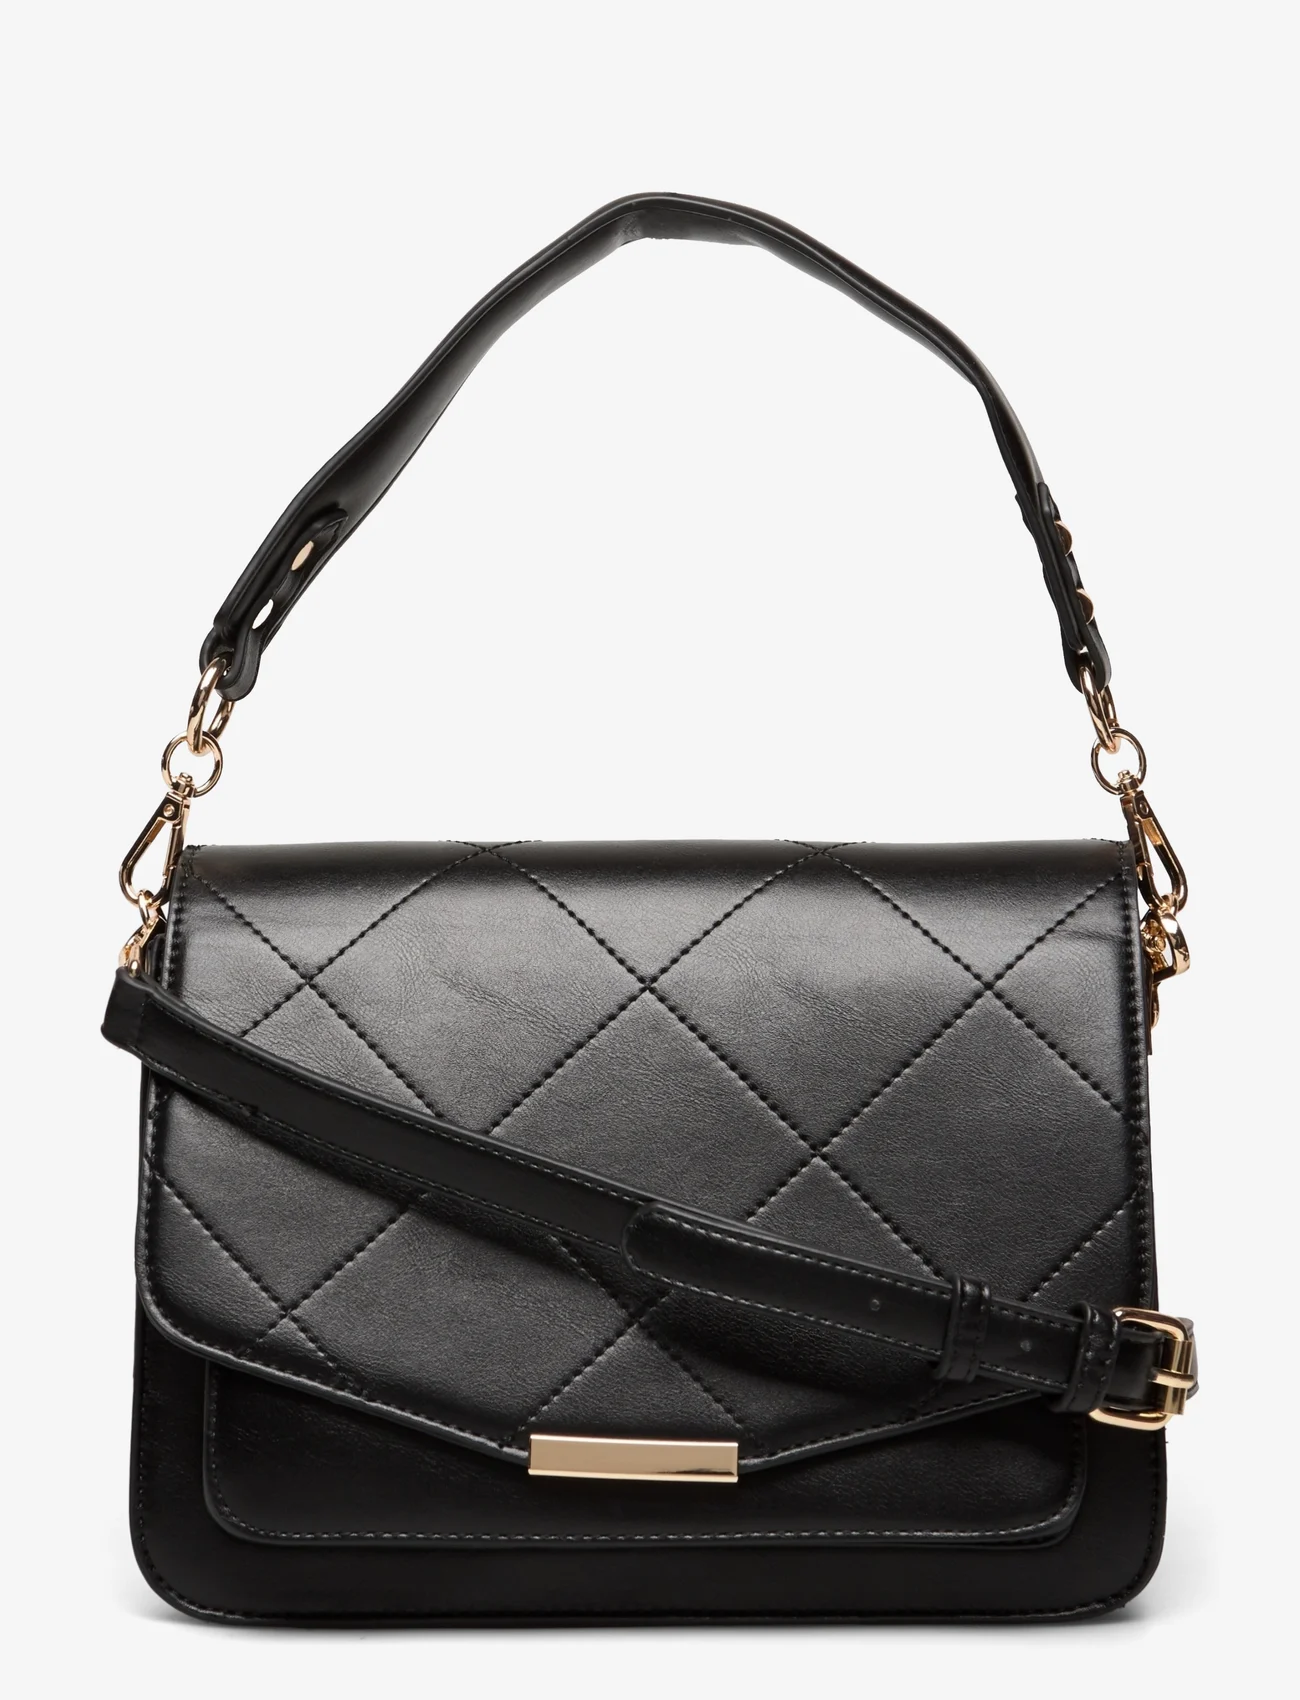 Noella - Blanca Multi Compartment Bag - party wear at outlet prices - black leather look - 0